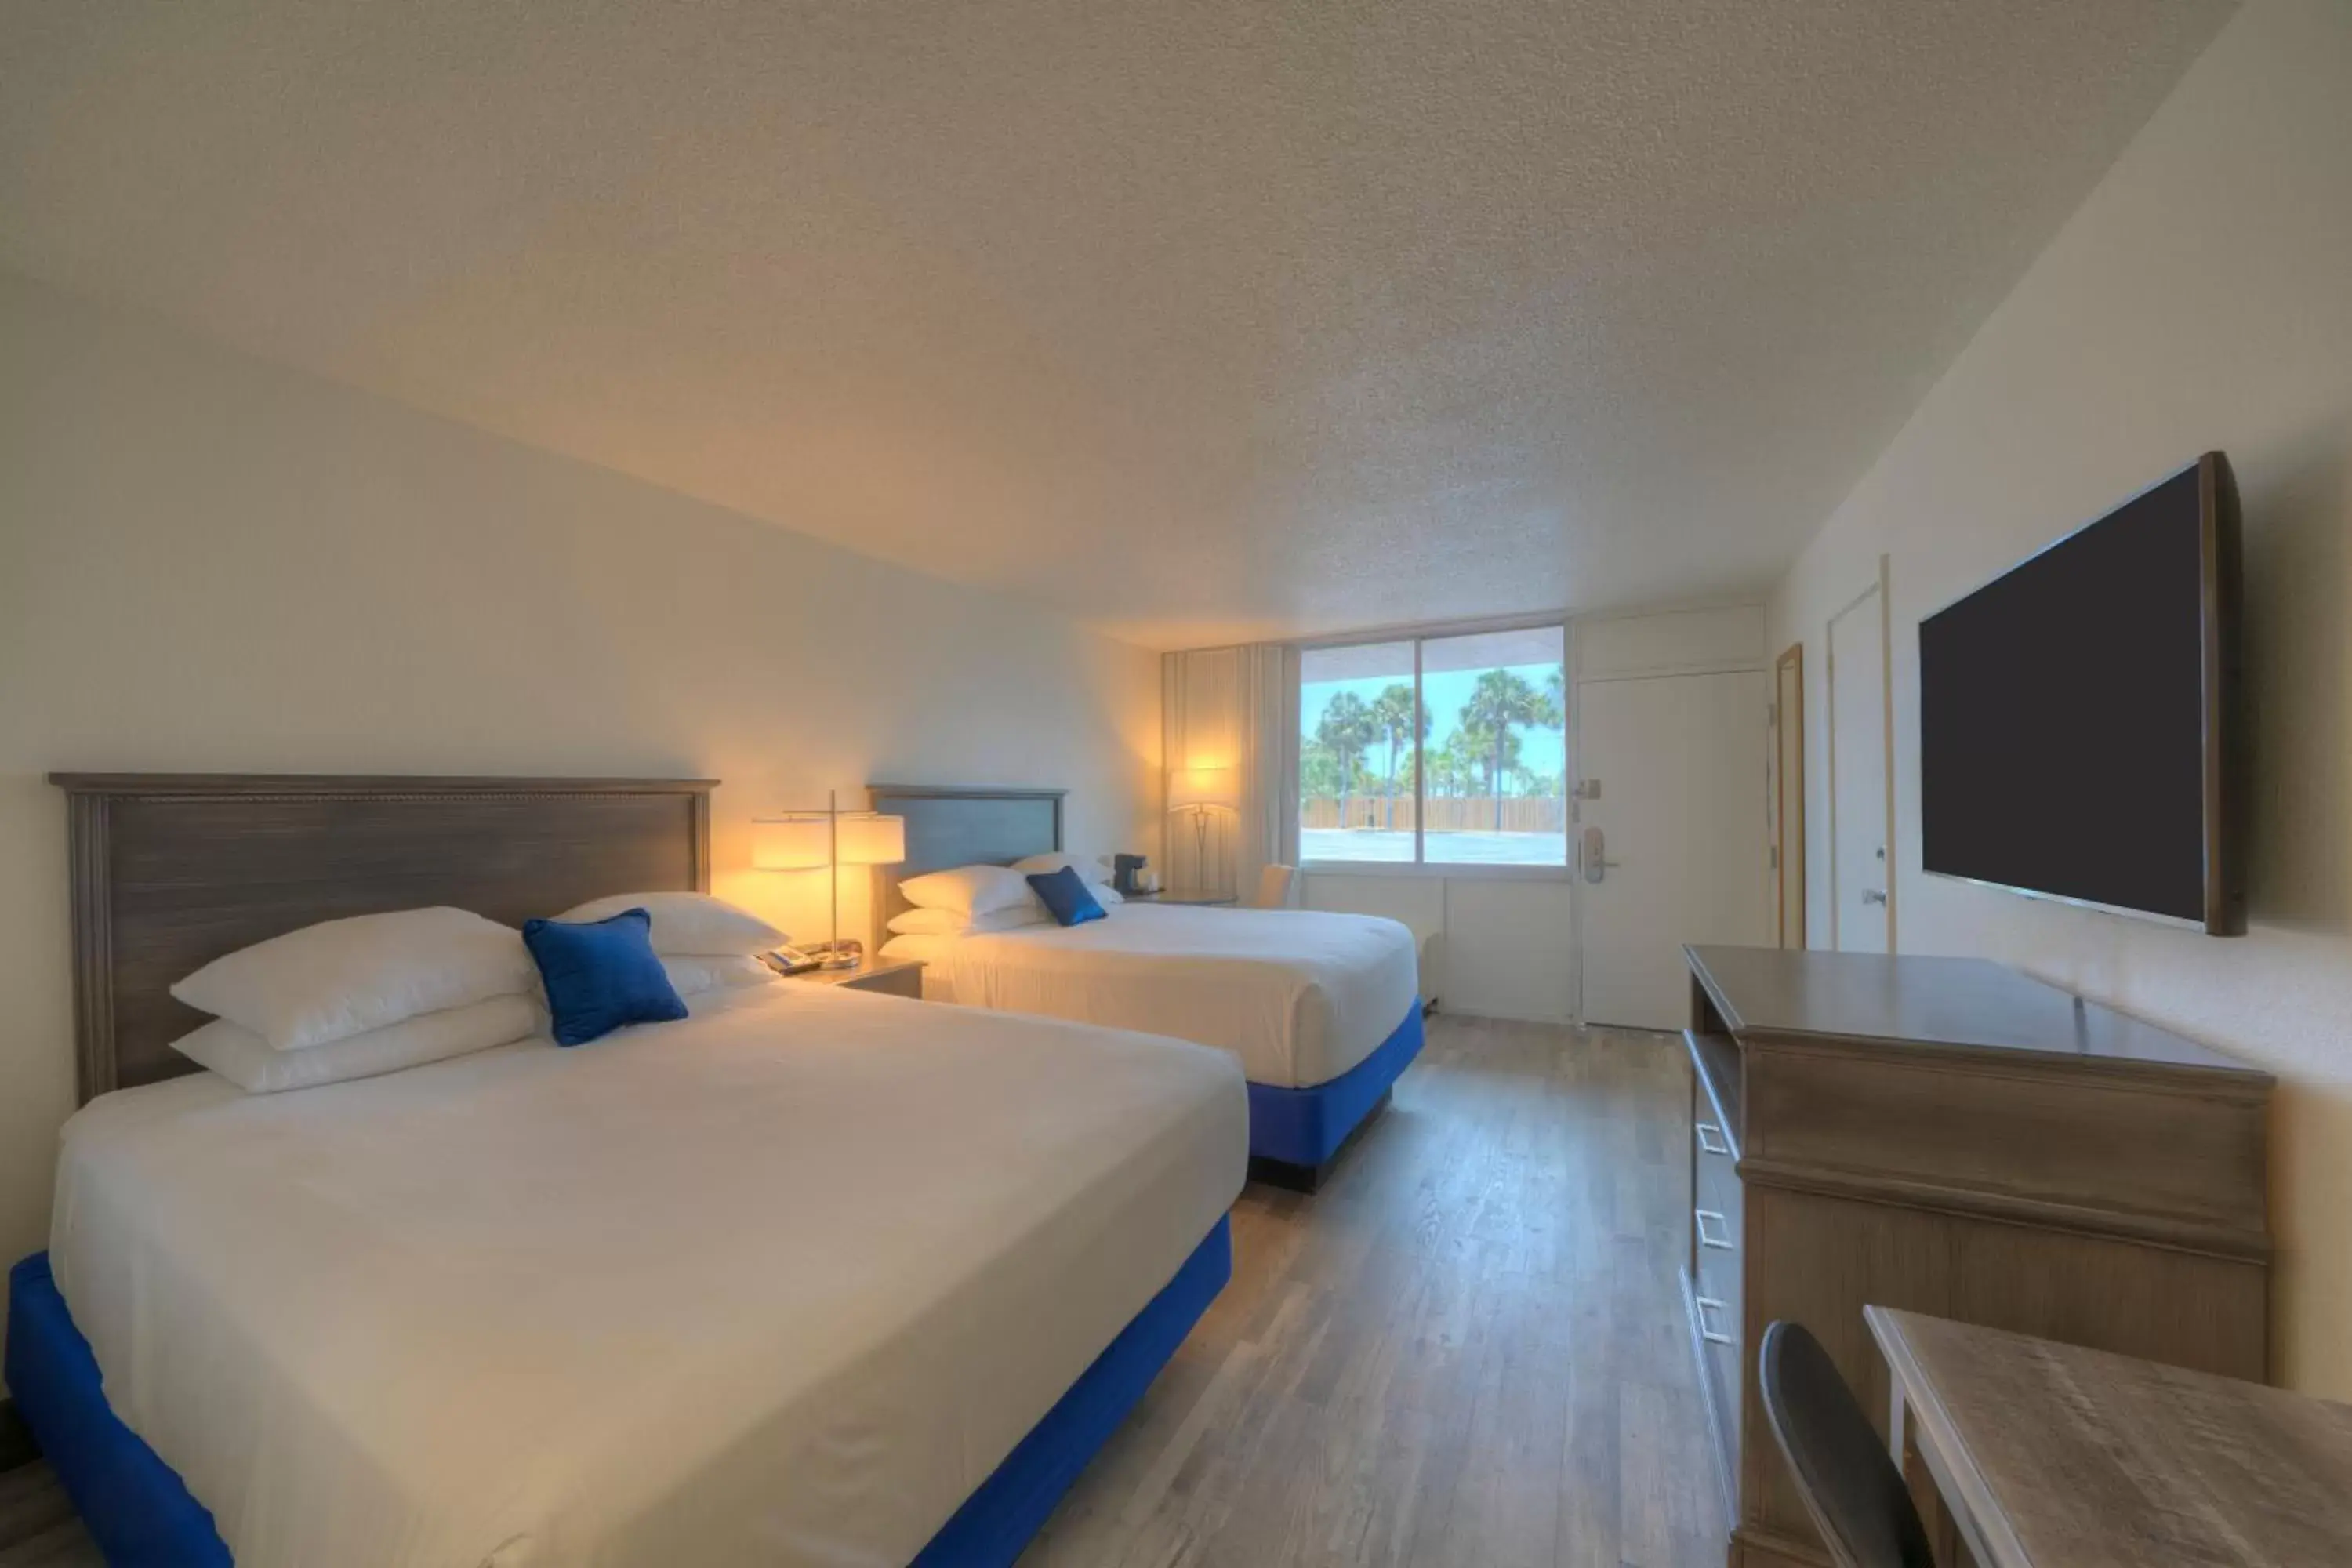 Bed in The Island Resort at Fort Walton Beach